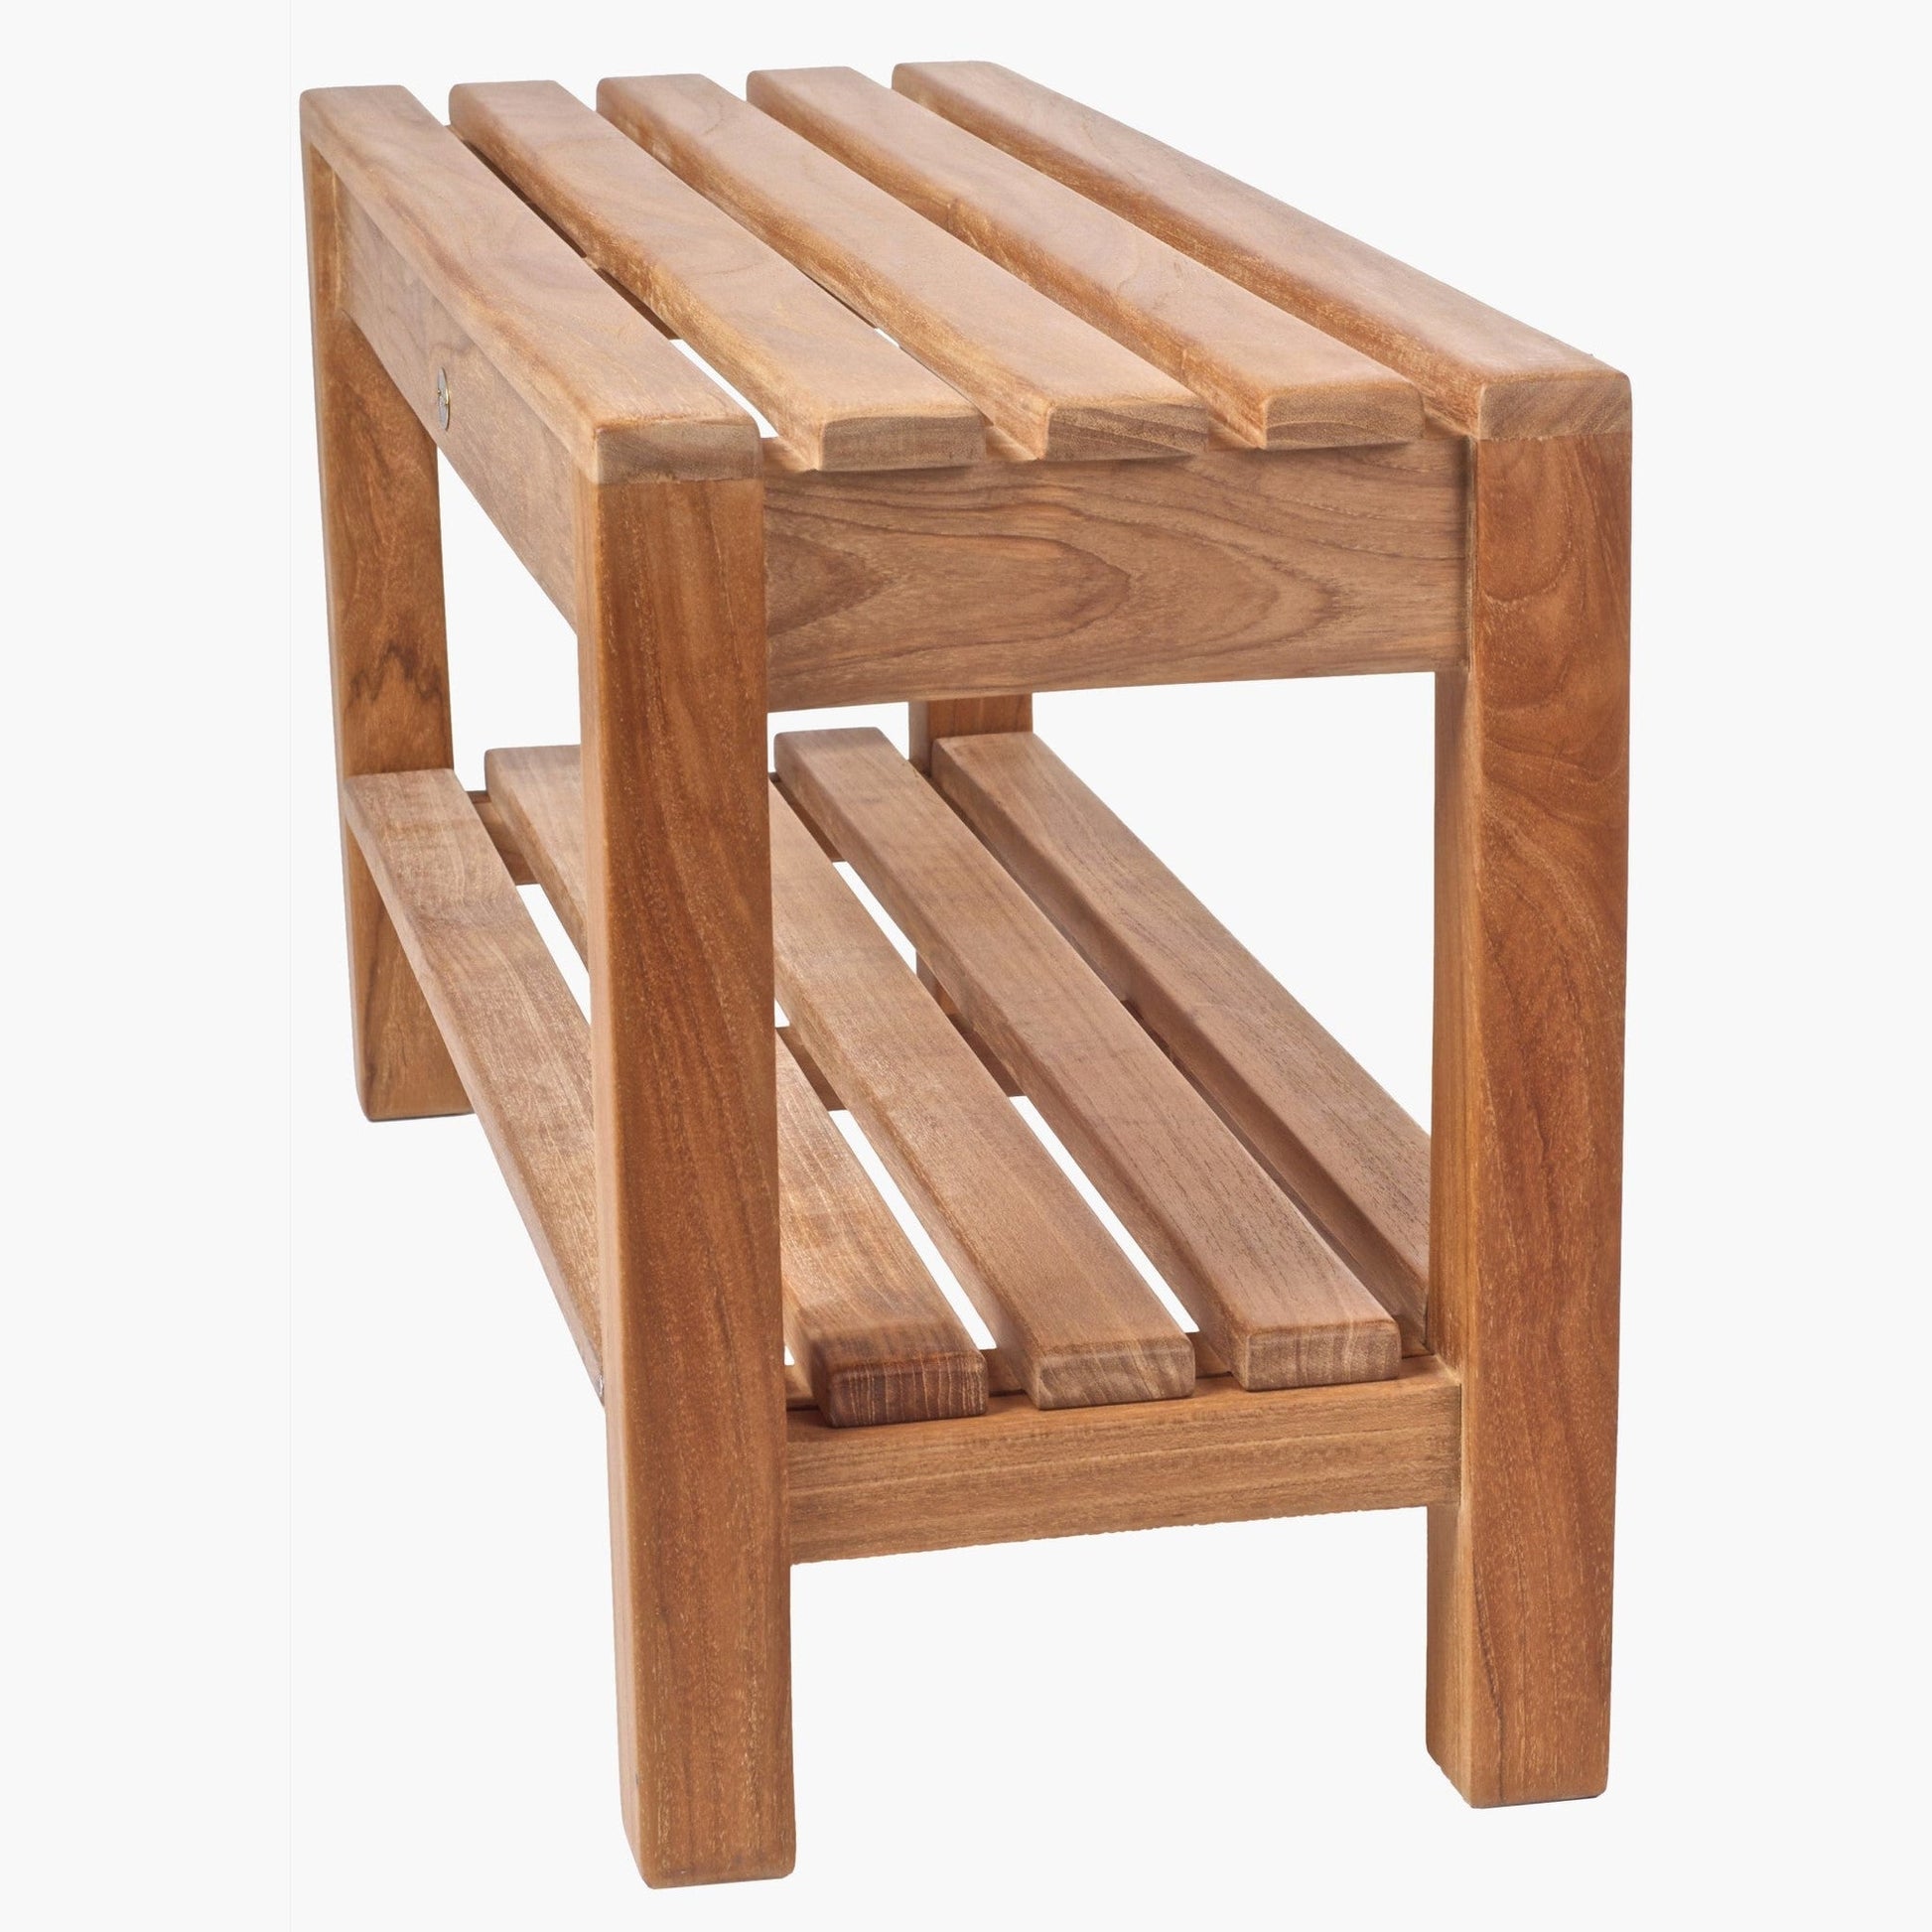 ARB Teak & Specialties Coach 36" Solid Teak Wood Shower Bench With Removable Shelf